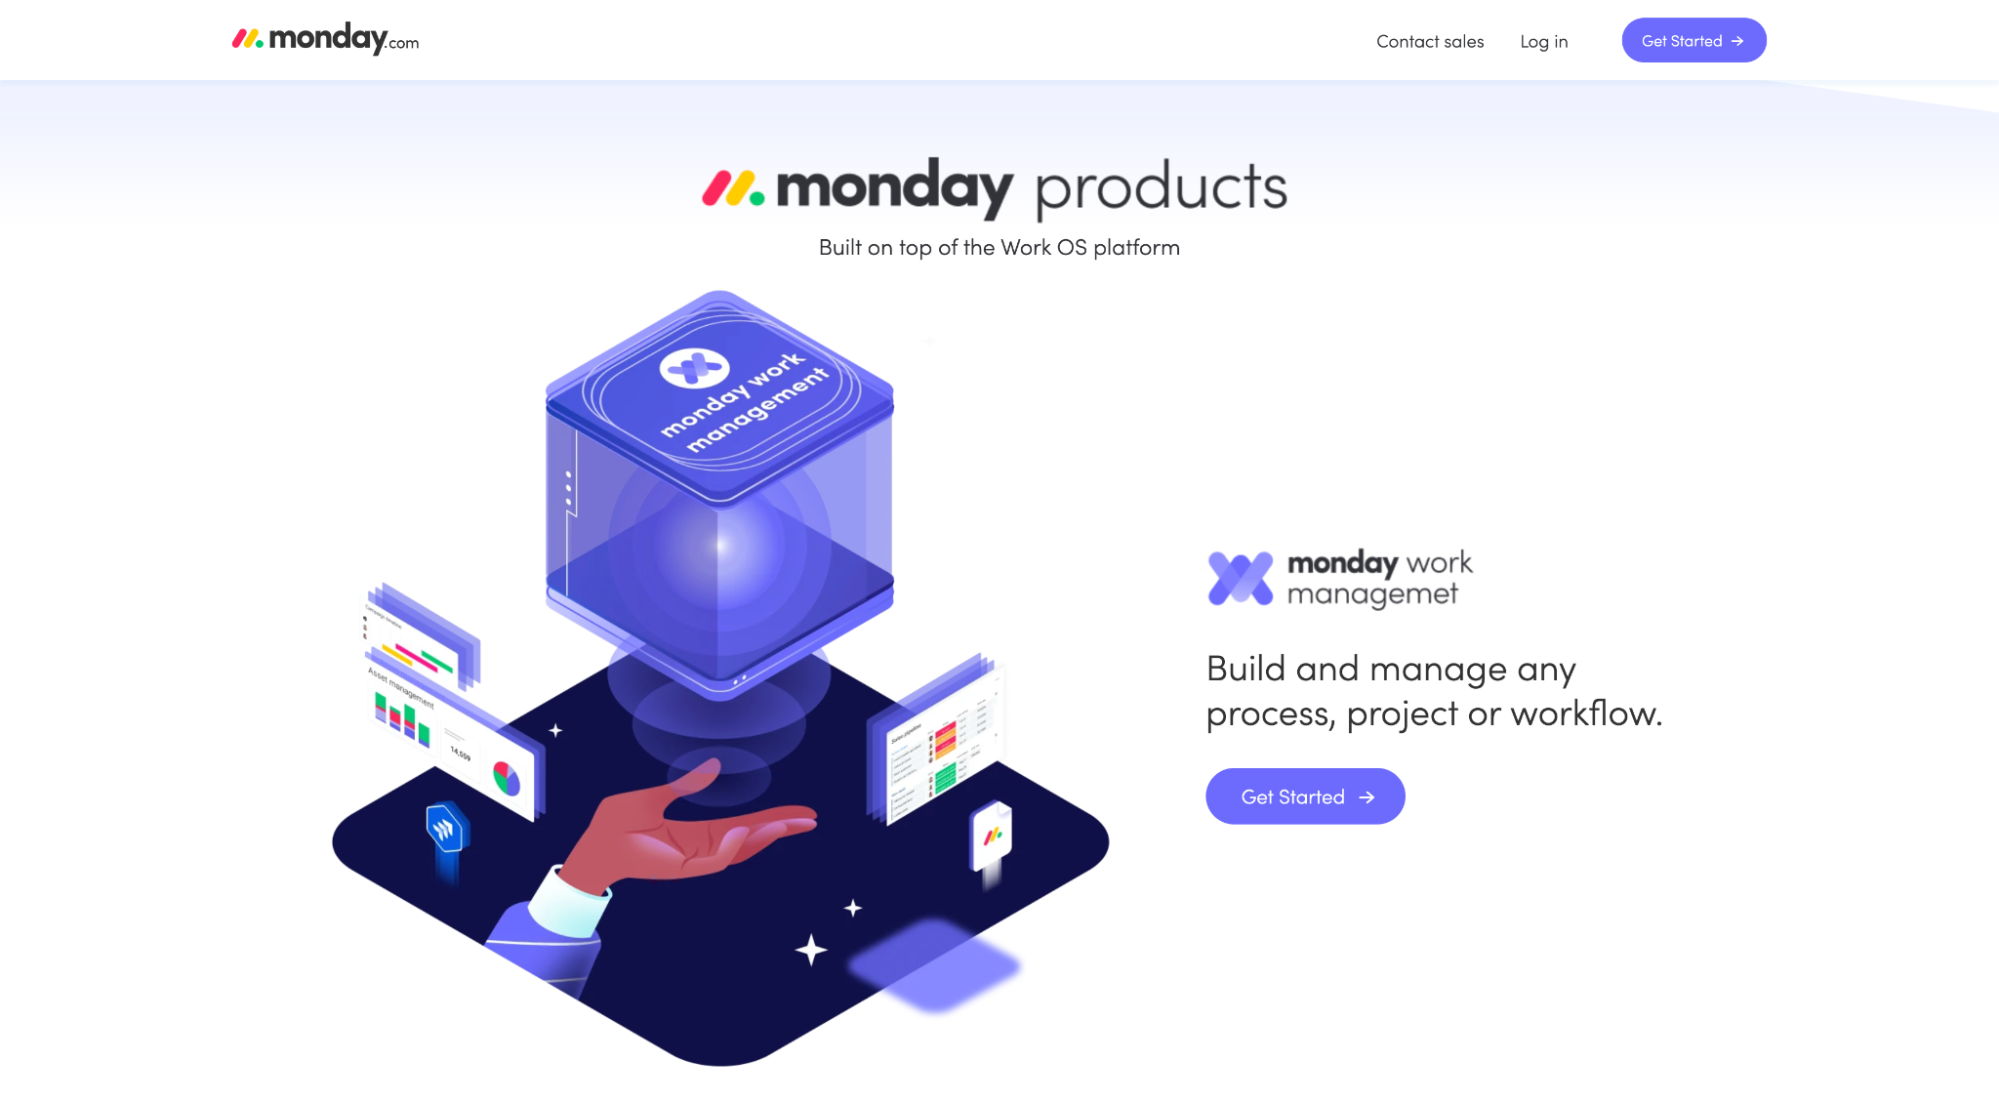 Monday.com "how it works" section